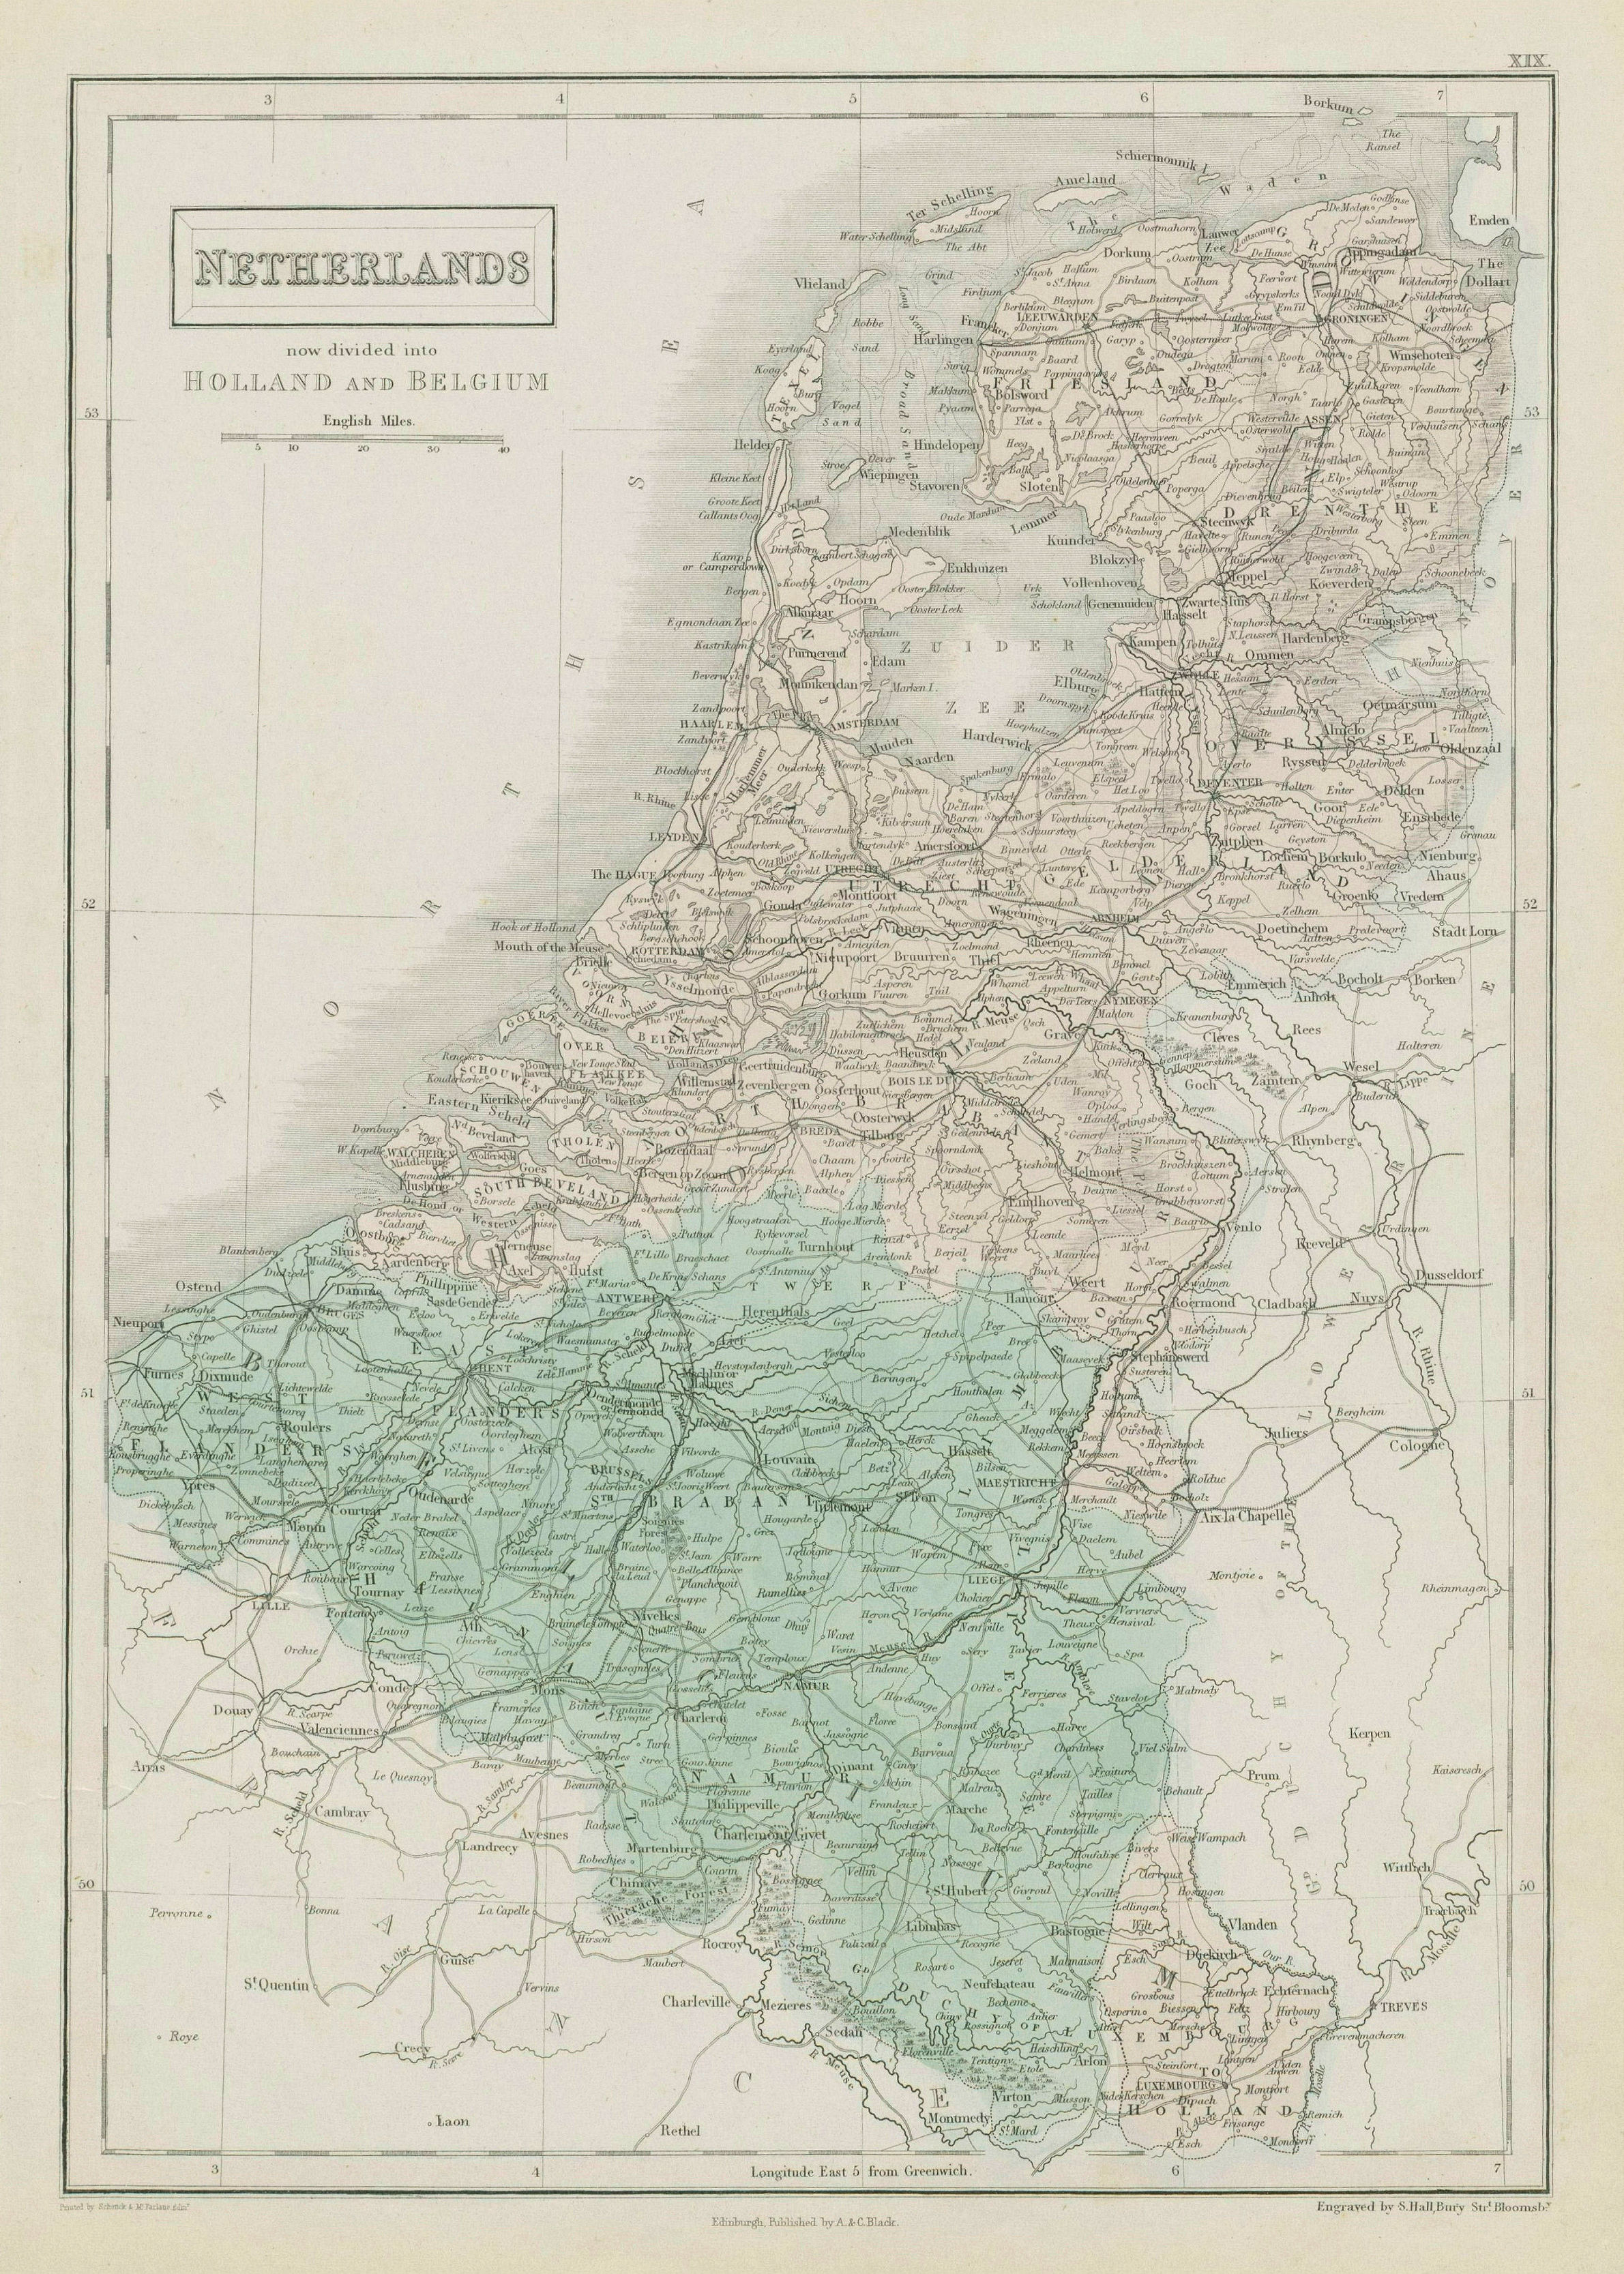 Associate Product "Netherlands, now divided into Holland & Belgium". Benelux. SIDNEY HALL 1856 map